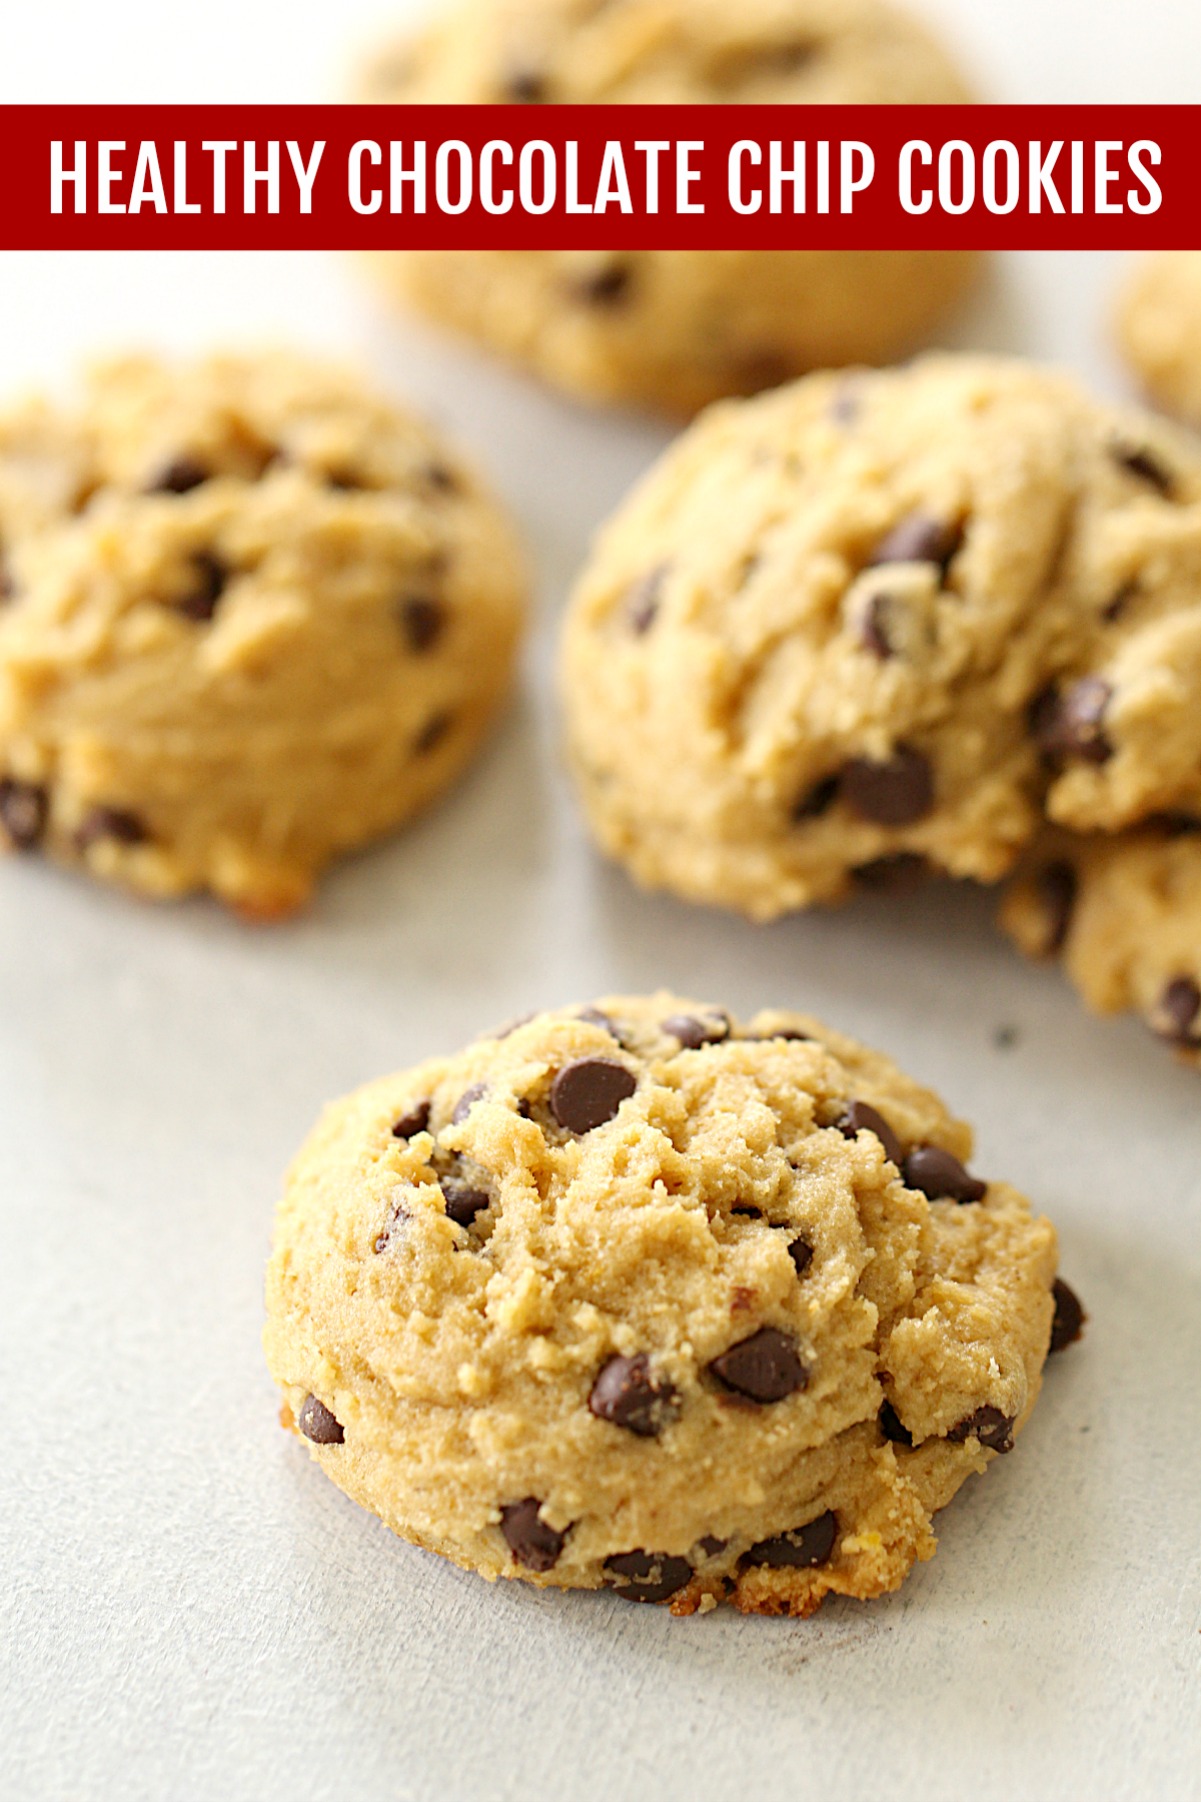 Healthy Chocolate Chip Cookies with Kodiak Cakes